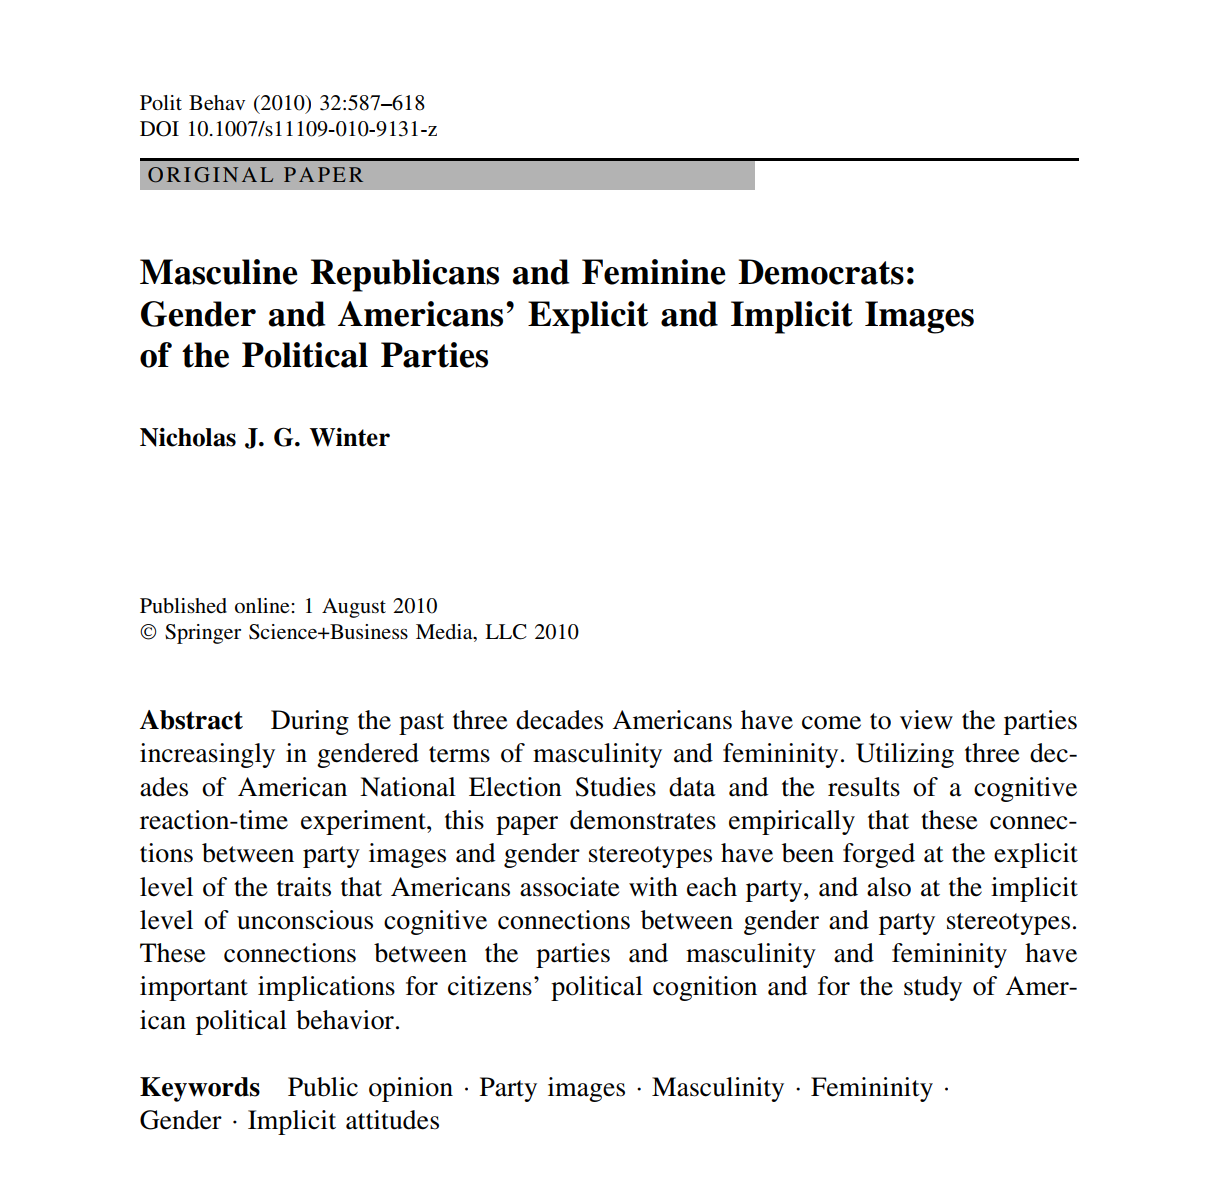 Masculine Republicans and Feminine Democrats: Gender and Americans’ Explicit and Implicit Images of the Political Parties